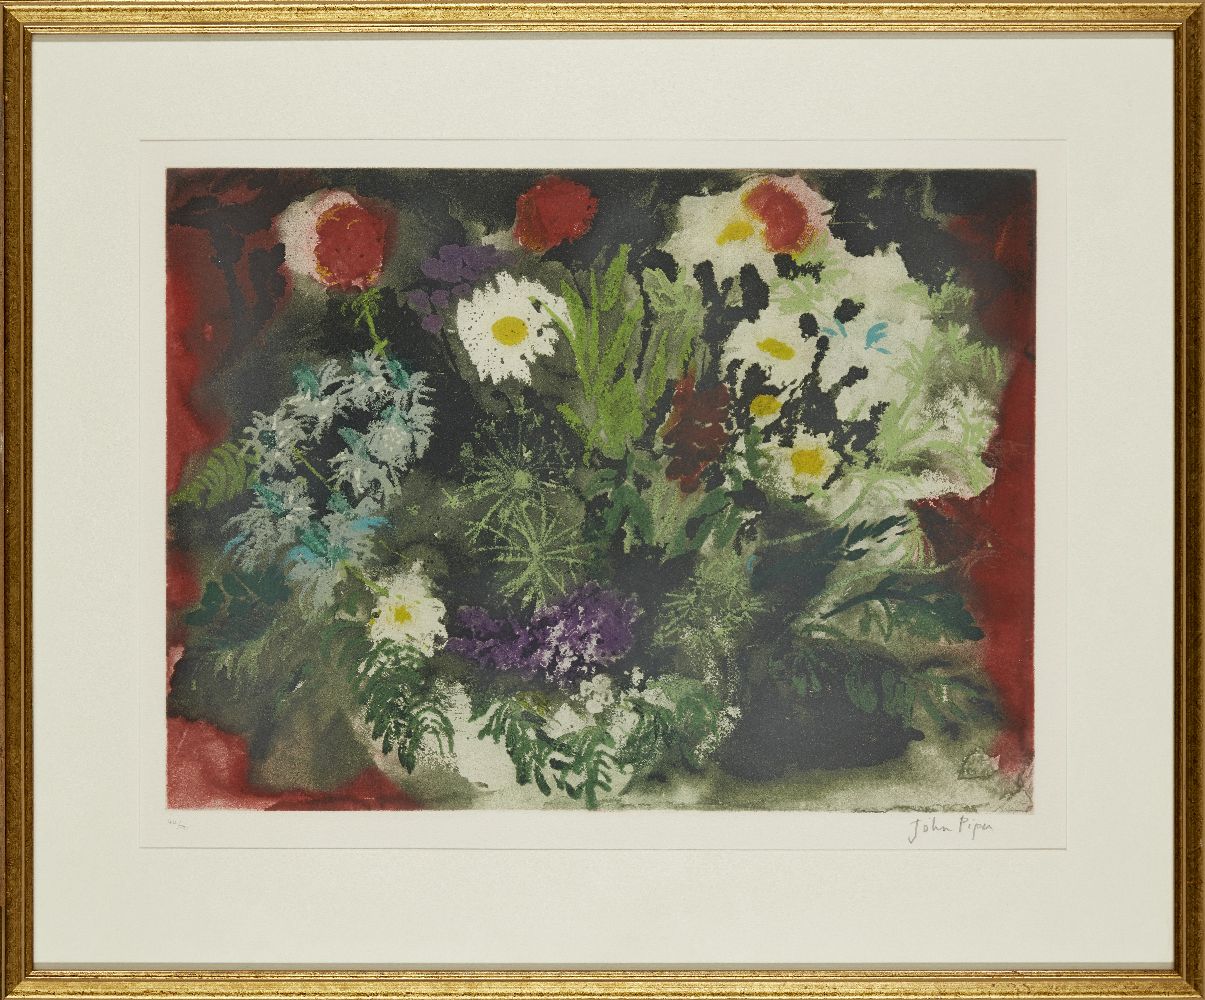 John Piper CH, British 1903-1992- Late Summer Flowers [Levinson 419], 1989; etching with aquatint in - Image 2 of 2